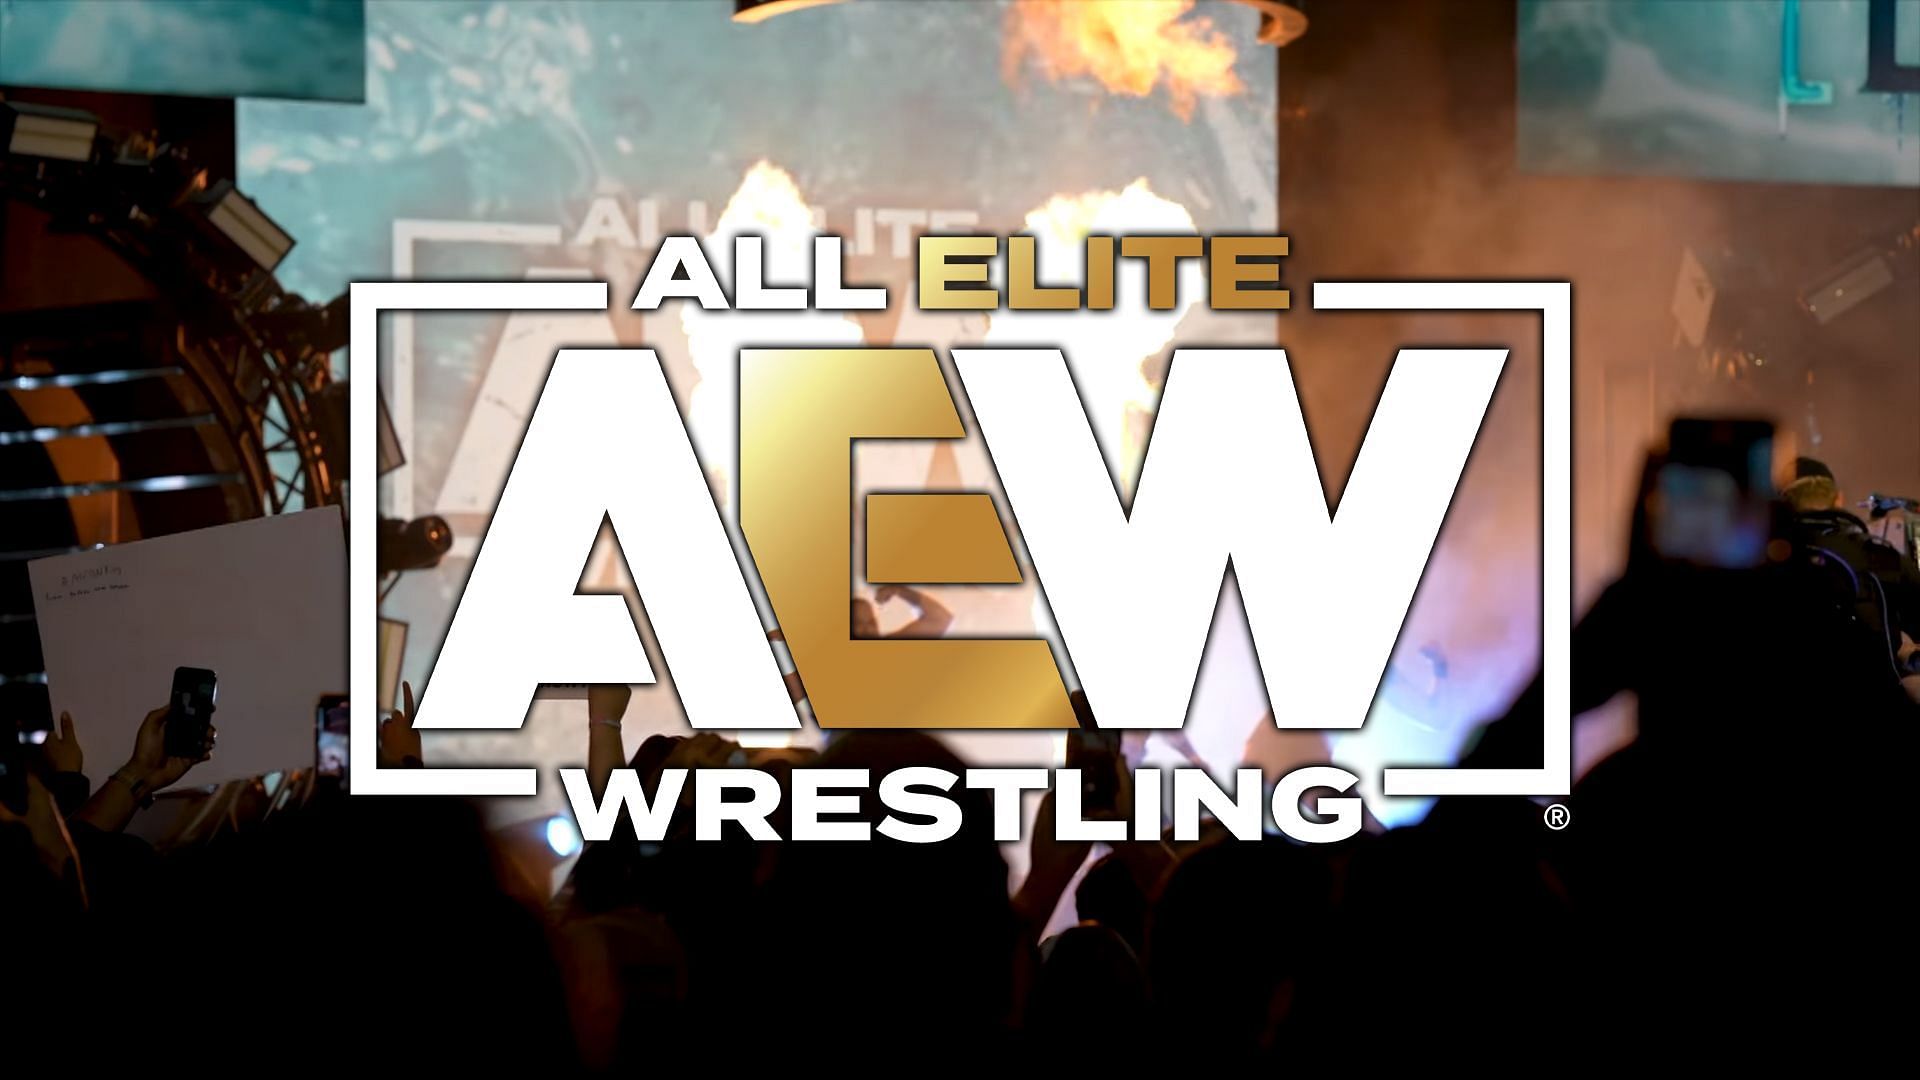 AEW talents often take bookings outside the company (image credit: All Elite Wrestling on YouTube)